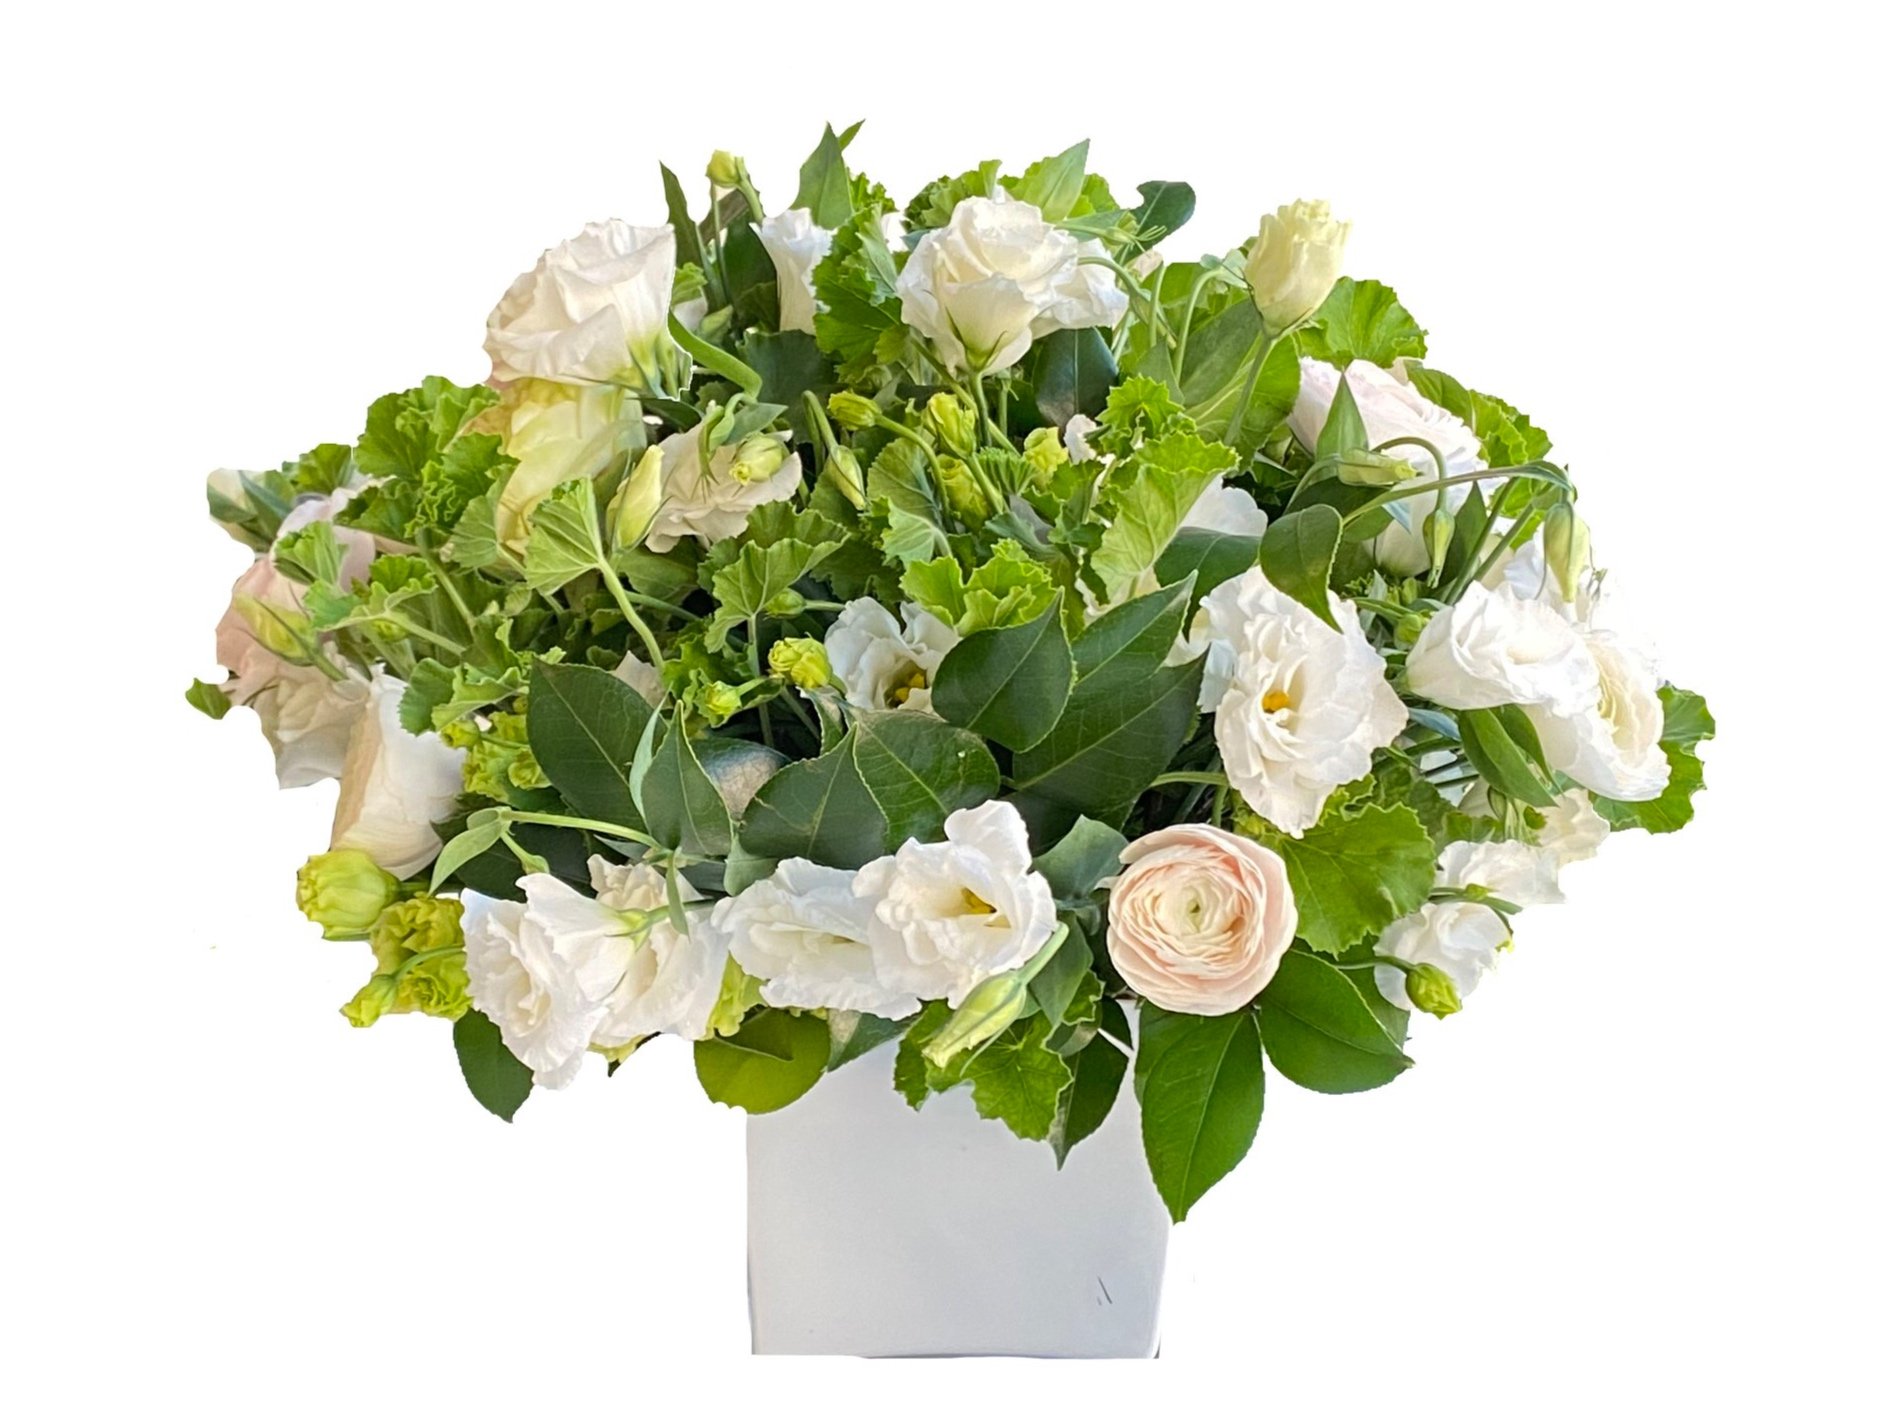 greens with lisianthus and ranunculus mix